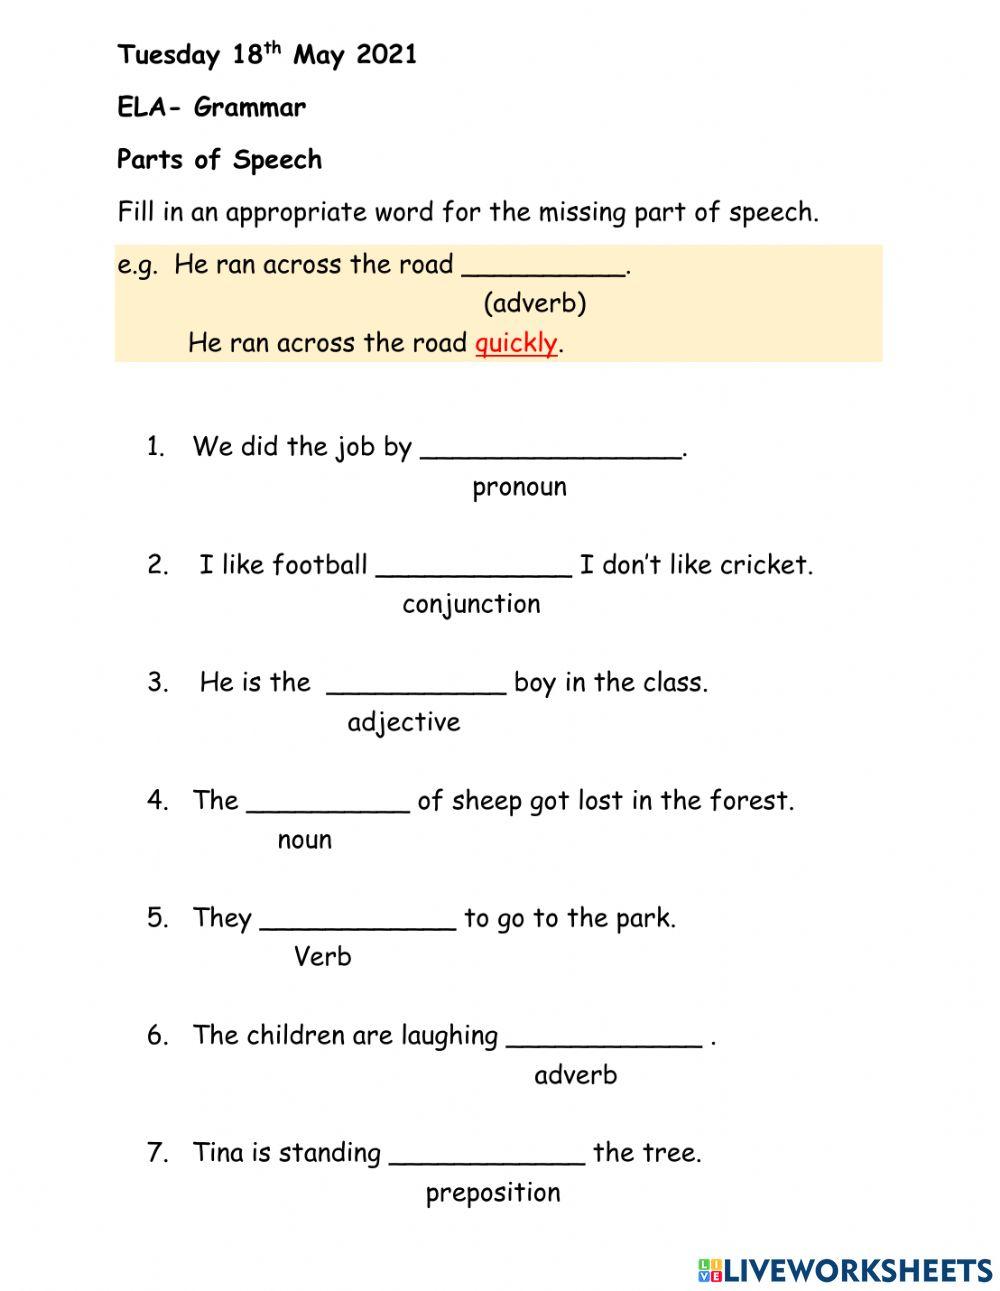 Second worksheet on parts of speech